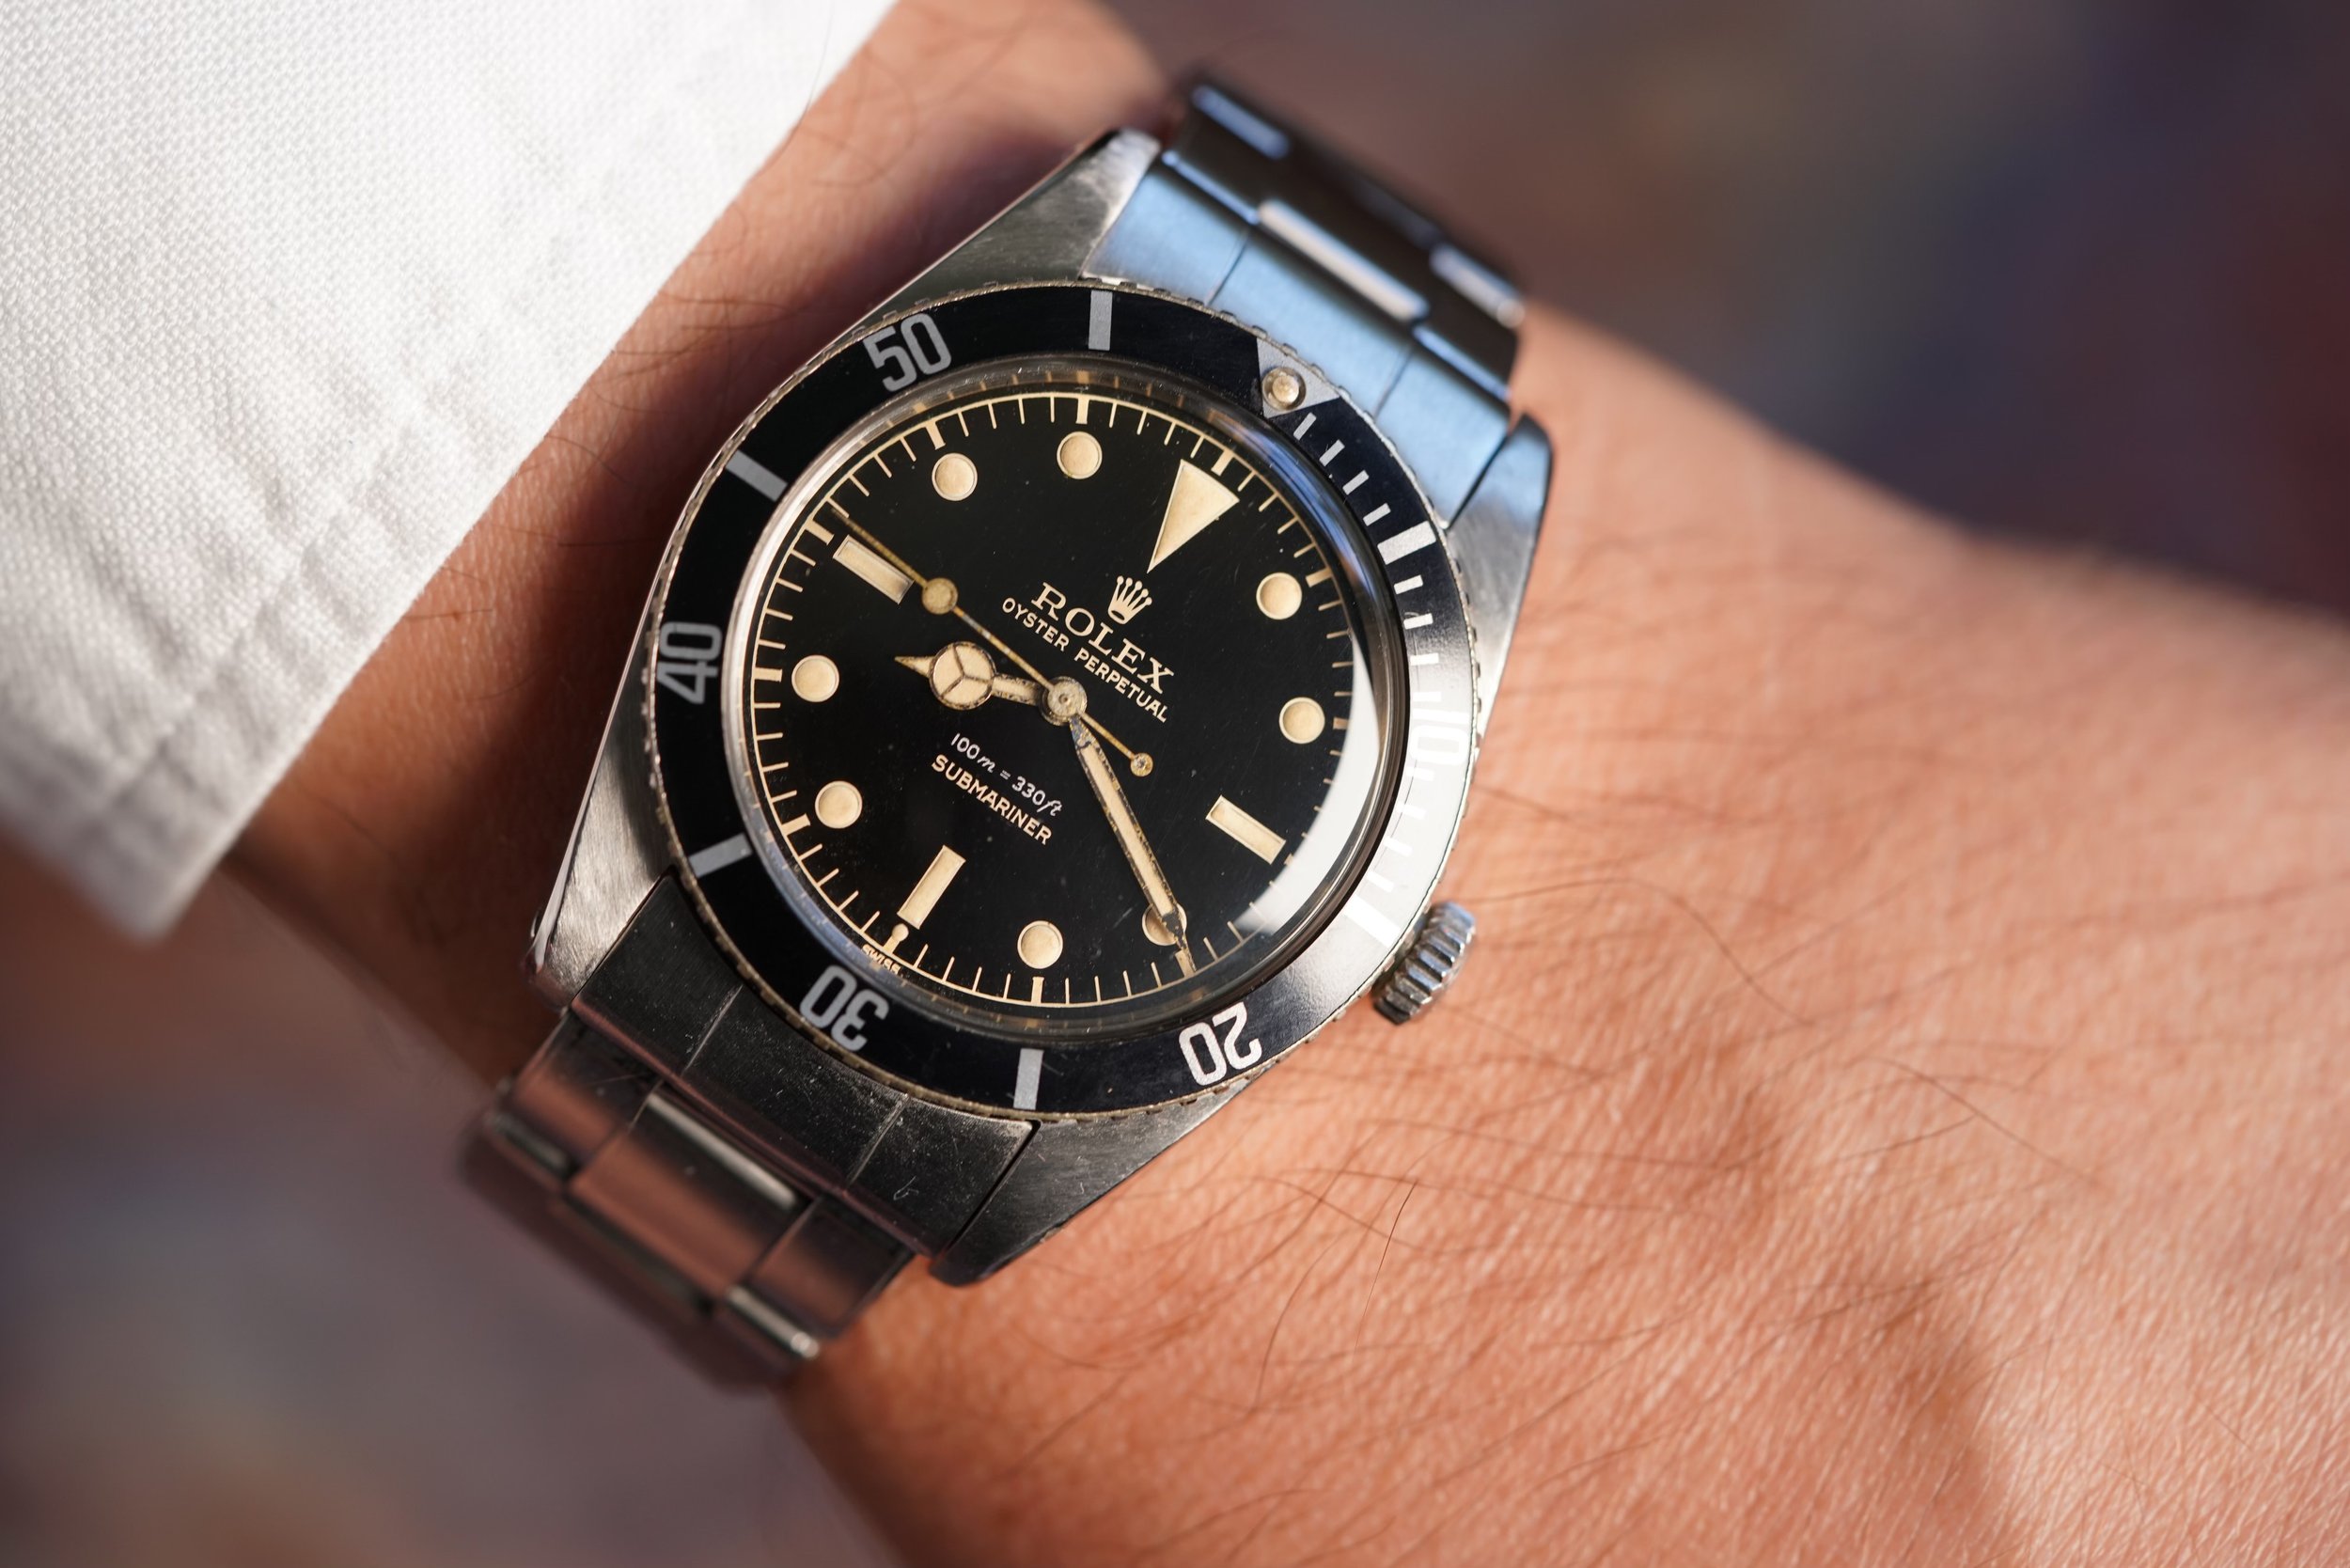 Submariner Reference 5508 Glossy Wind Vintage